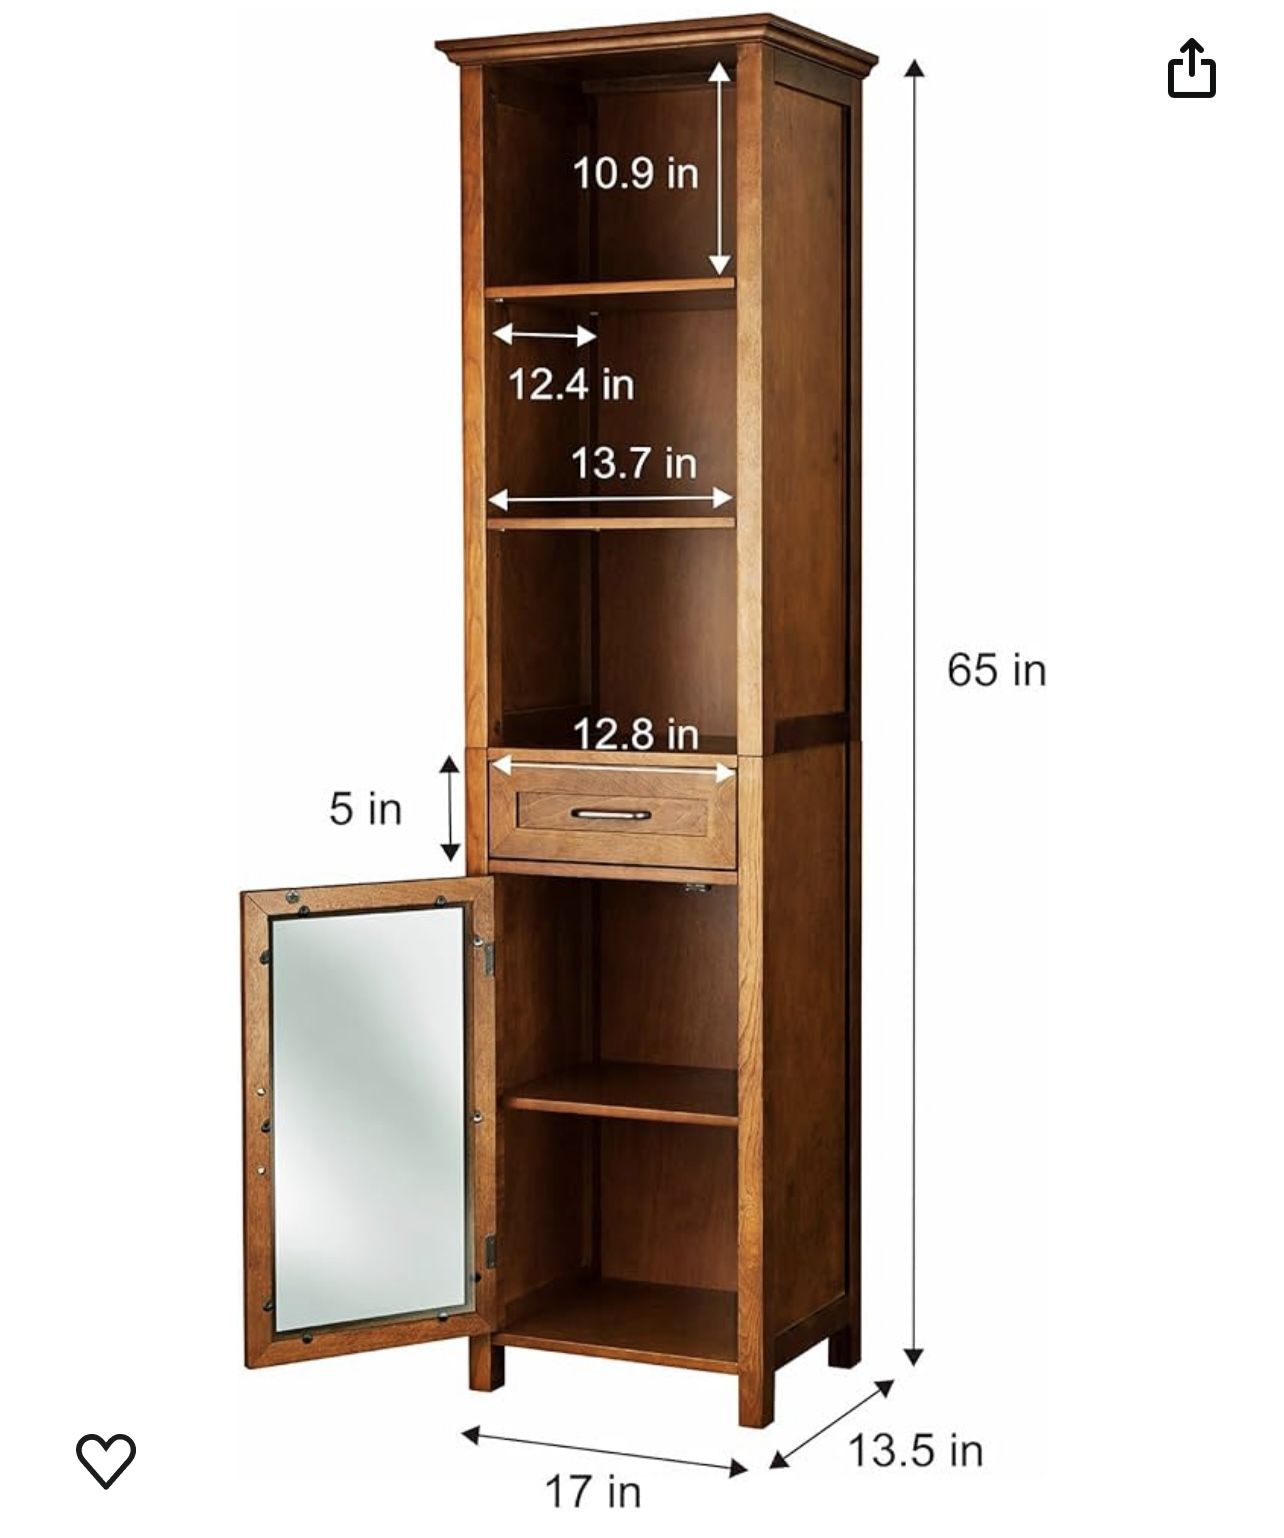 Teamson Home Avery Wooden Bathroom Linen Tower Cabinet with 1 Drawer 3 Adjustable Interior Shelves and 6 Storage Spaces, Oiled Oak